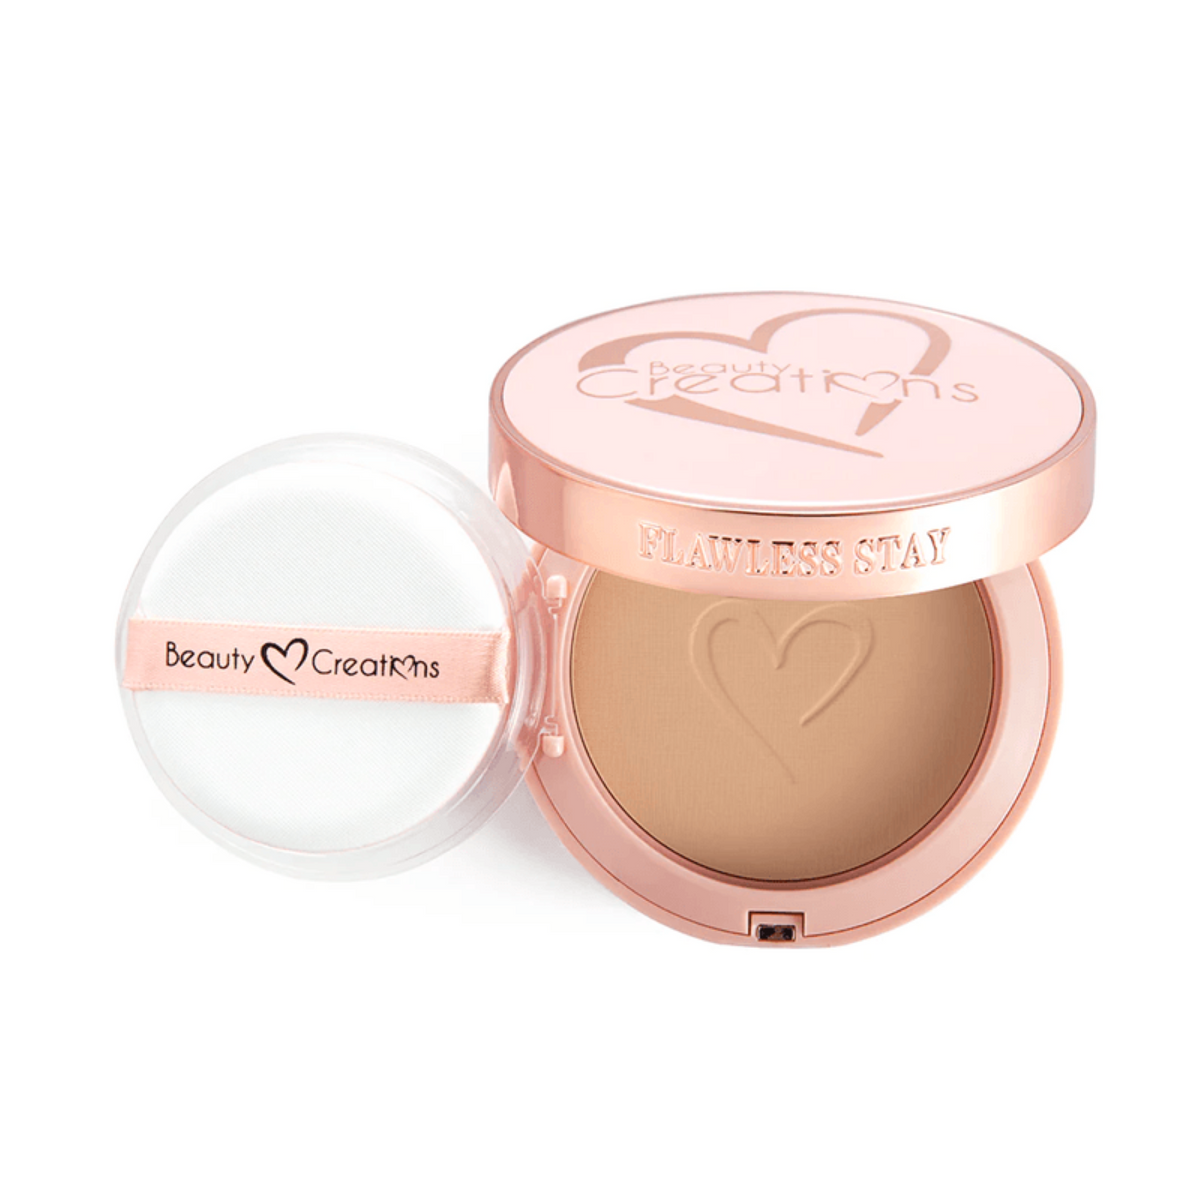 Polvo Compacto Beauty Creations Flawless Powder Foundation #1.0